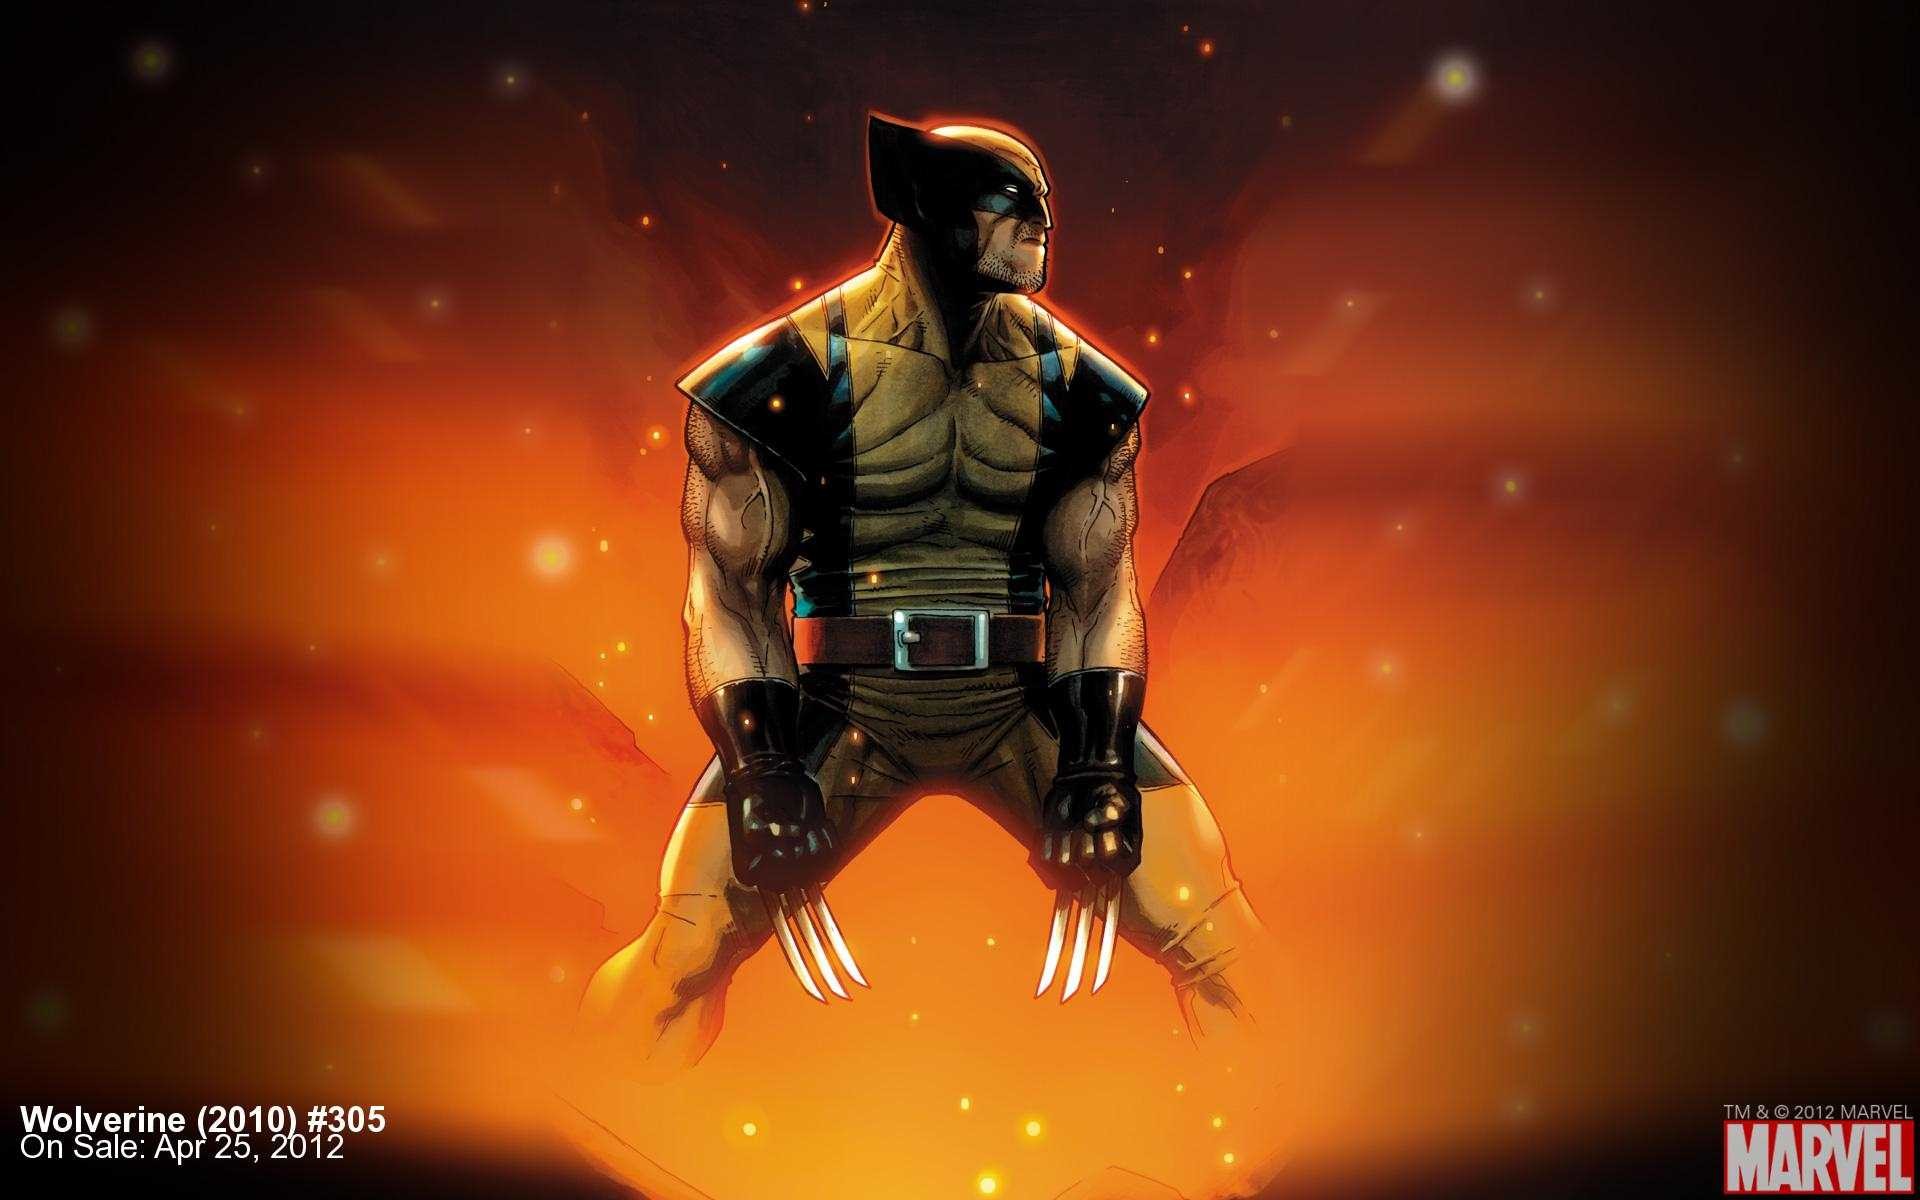 1920x1200 Wolverine Wallpapers HD - Wallpaper Cave Wolverine | Group News | News |  Marvel.com ...